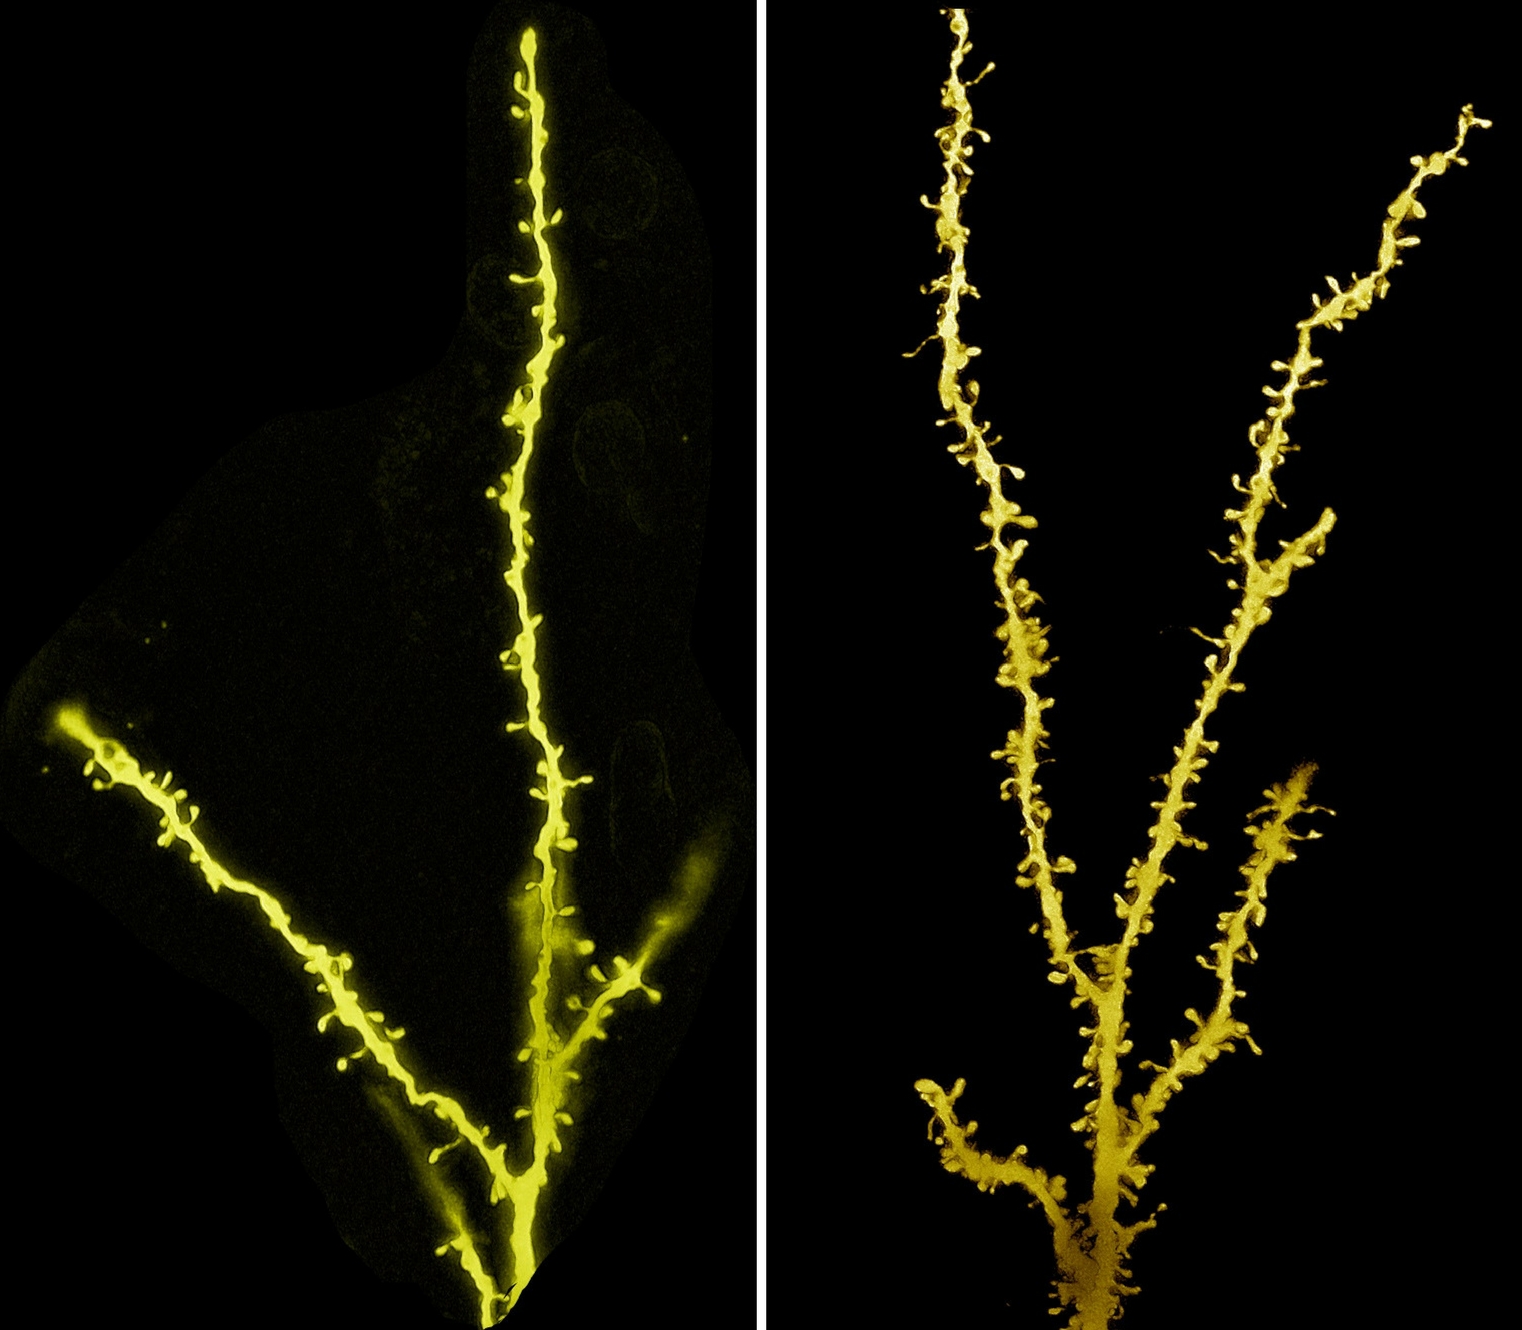 Image of dendrite spines in child with autism and in child without